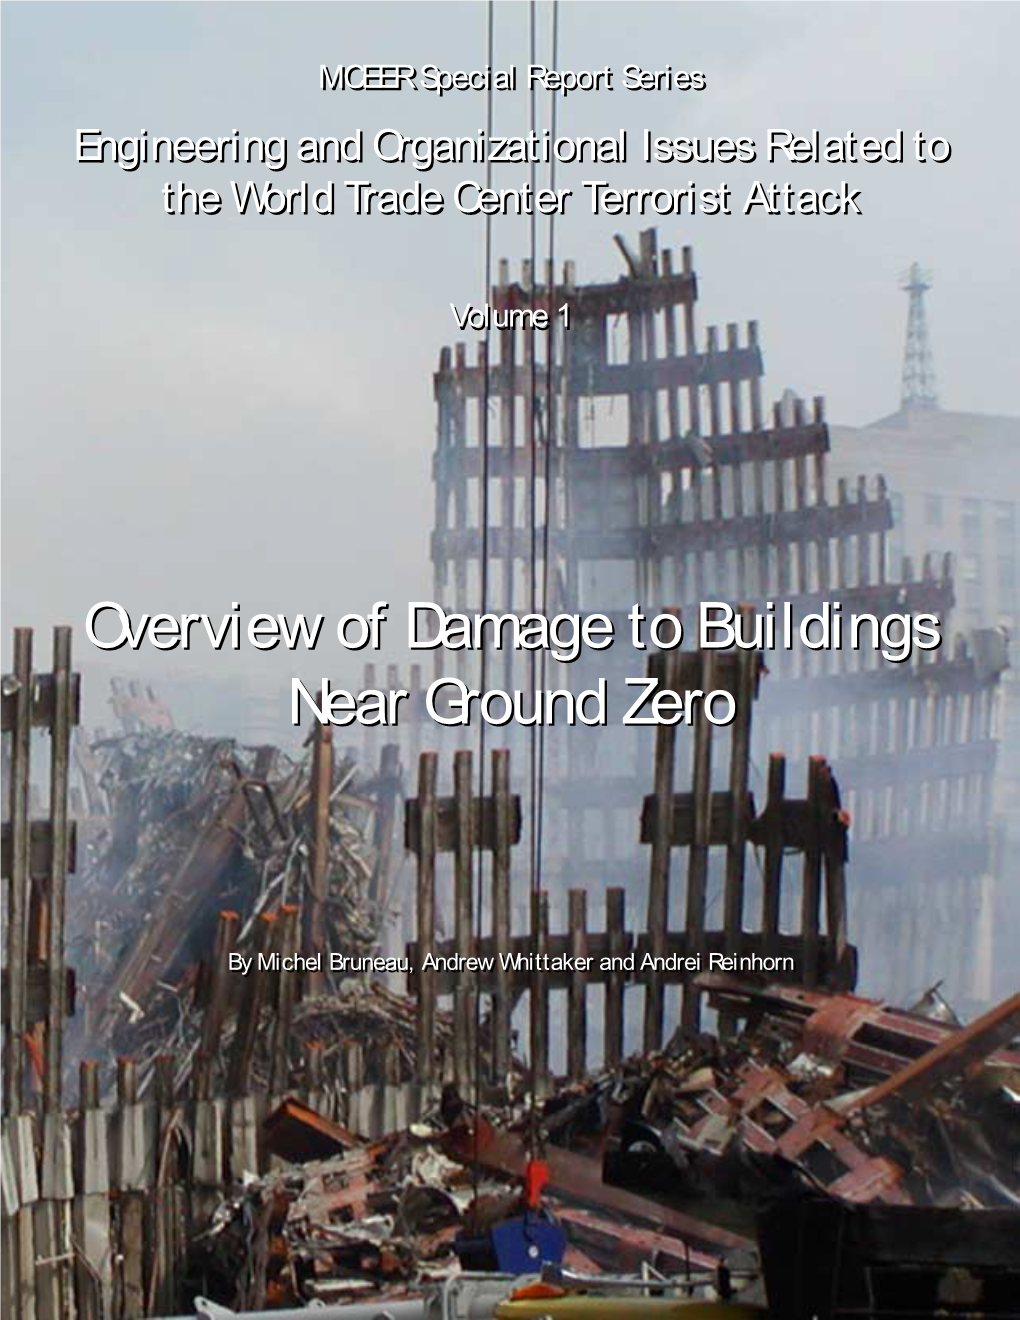 Overview of Damage to Buildings Near Ground Zero